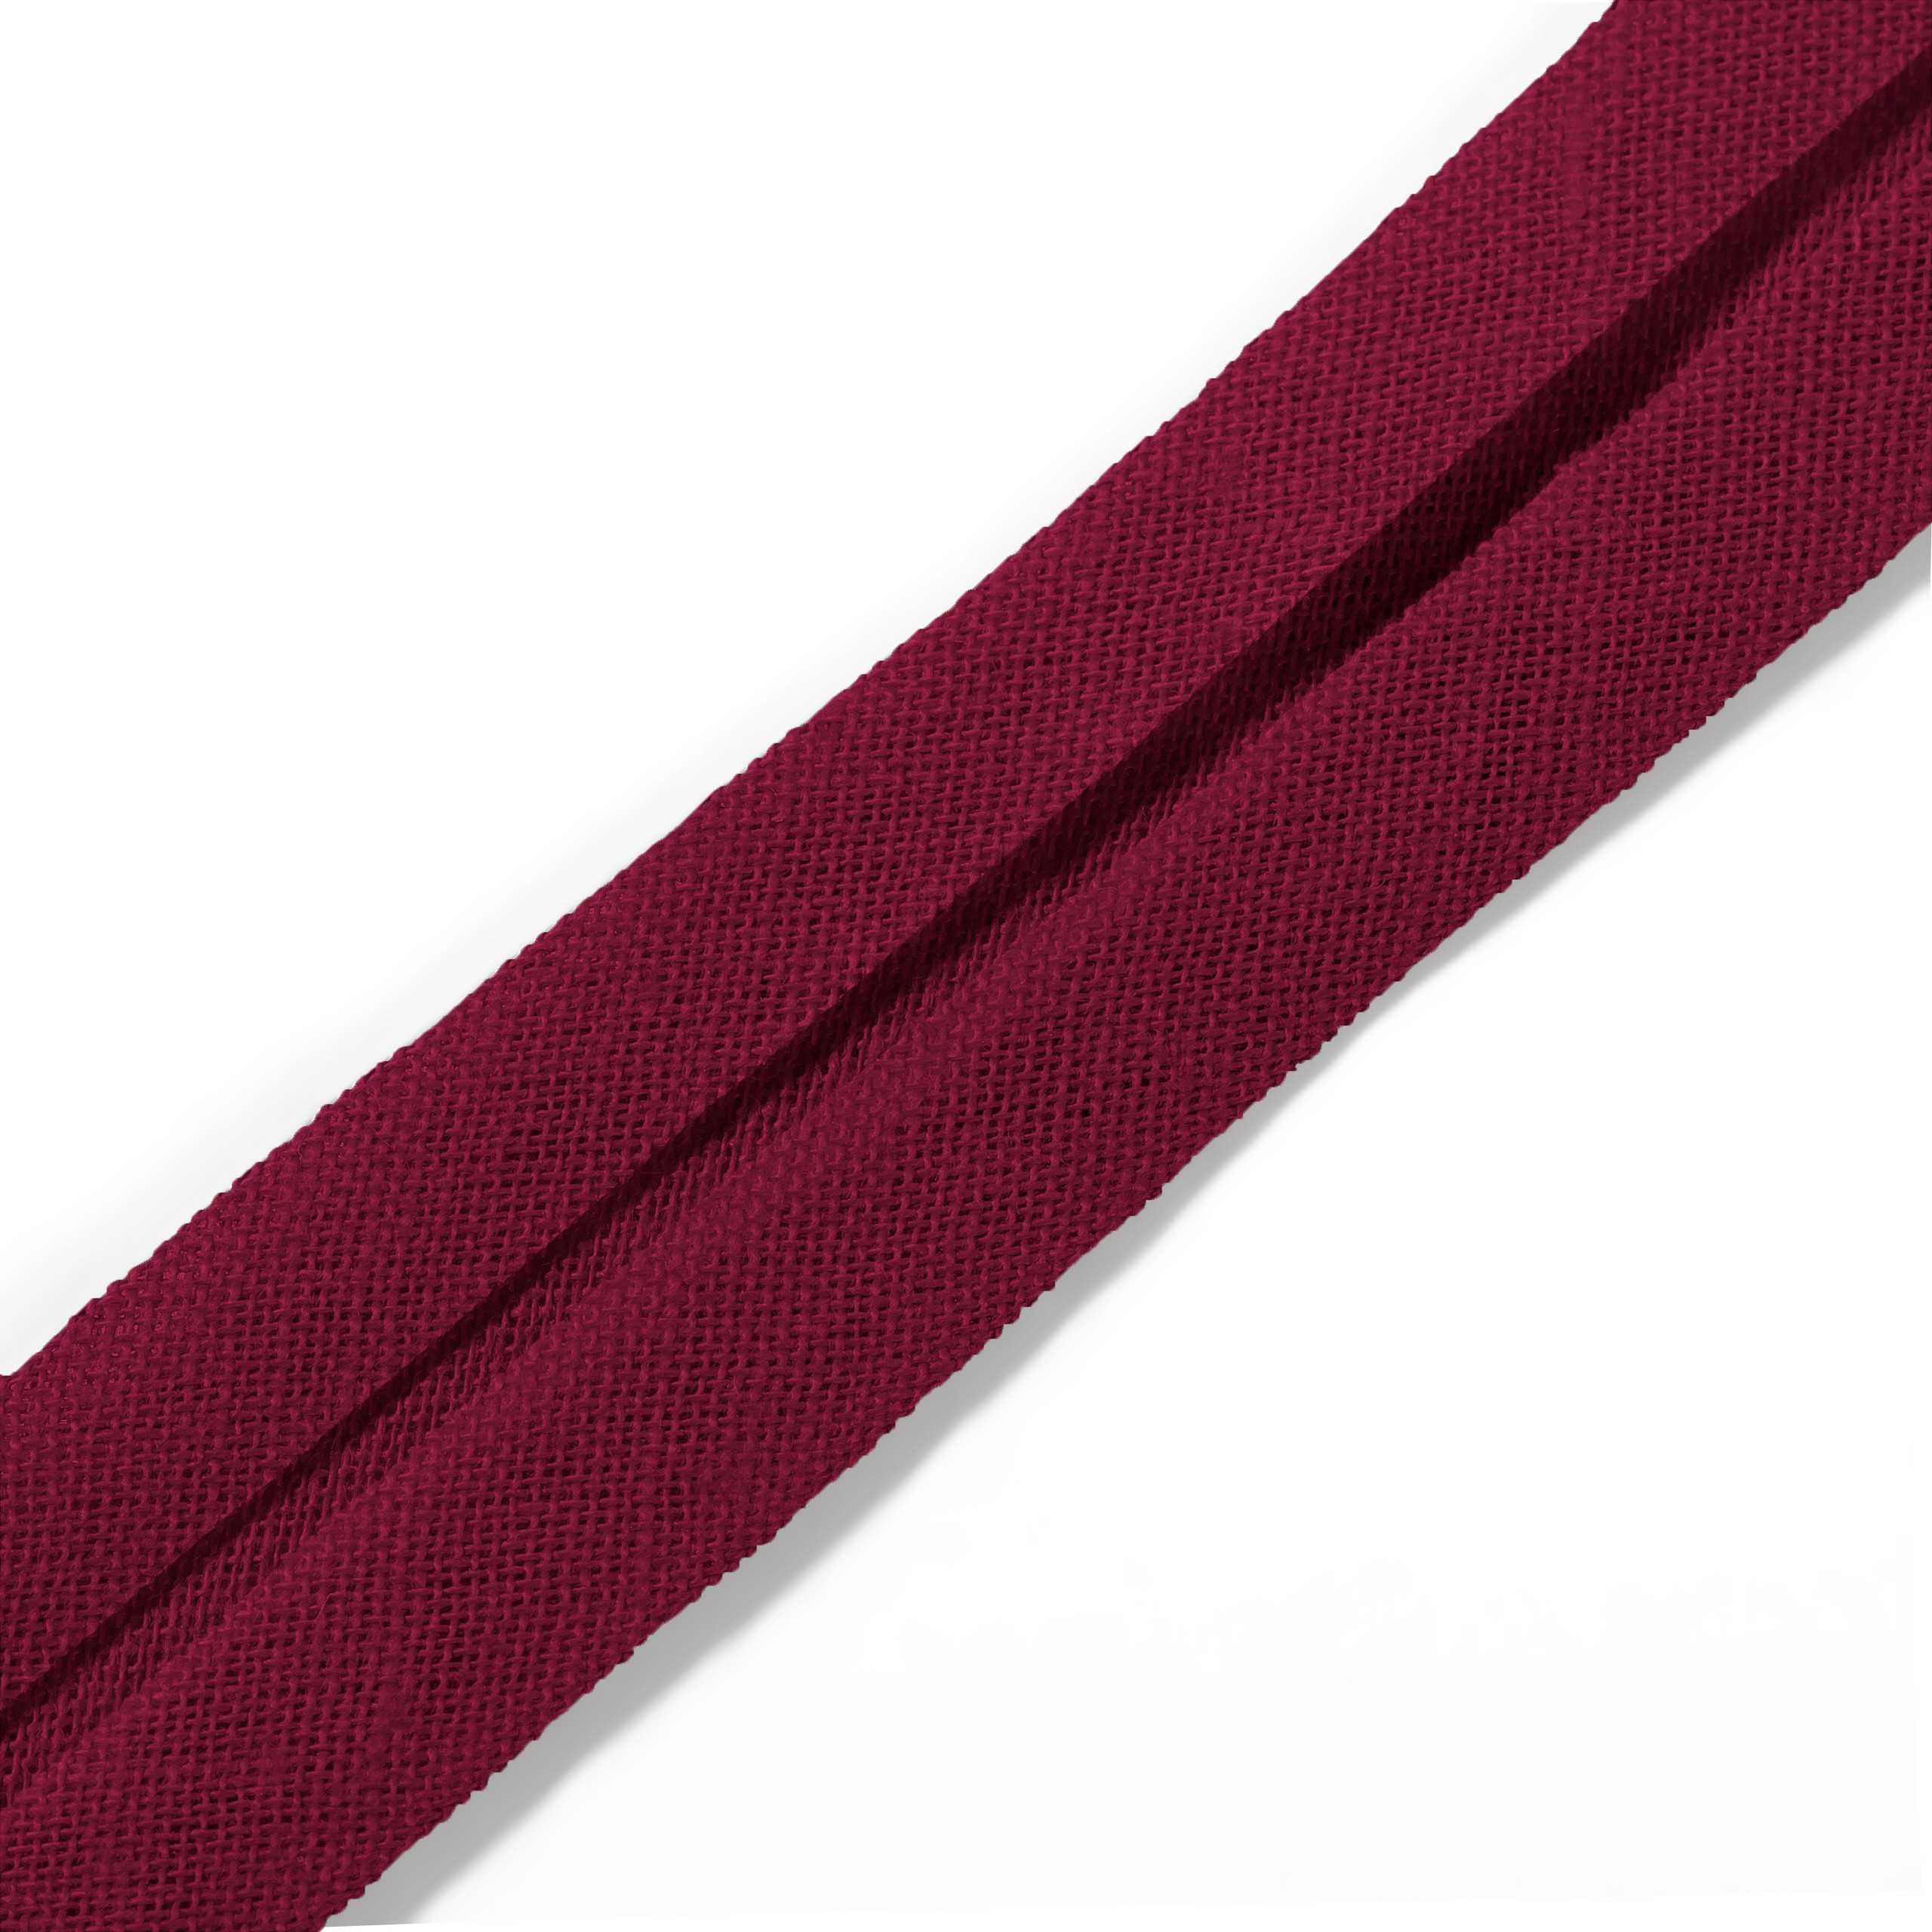 Bias Binding Cotton 40/20 mm bordeaux, available by meter